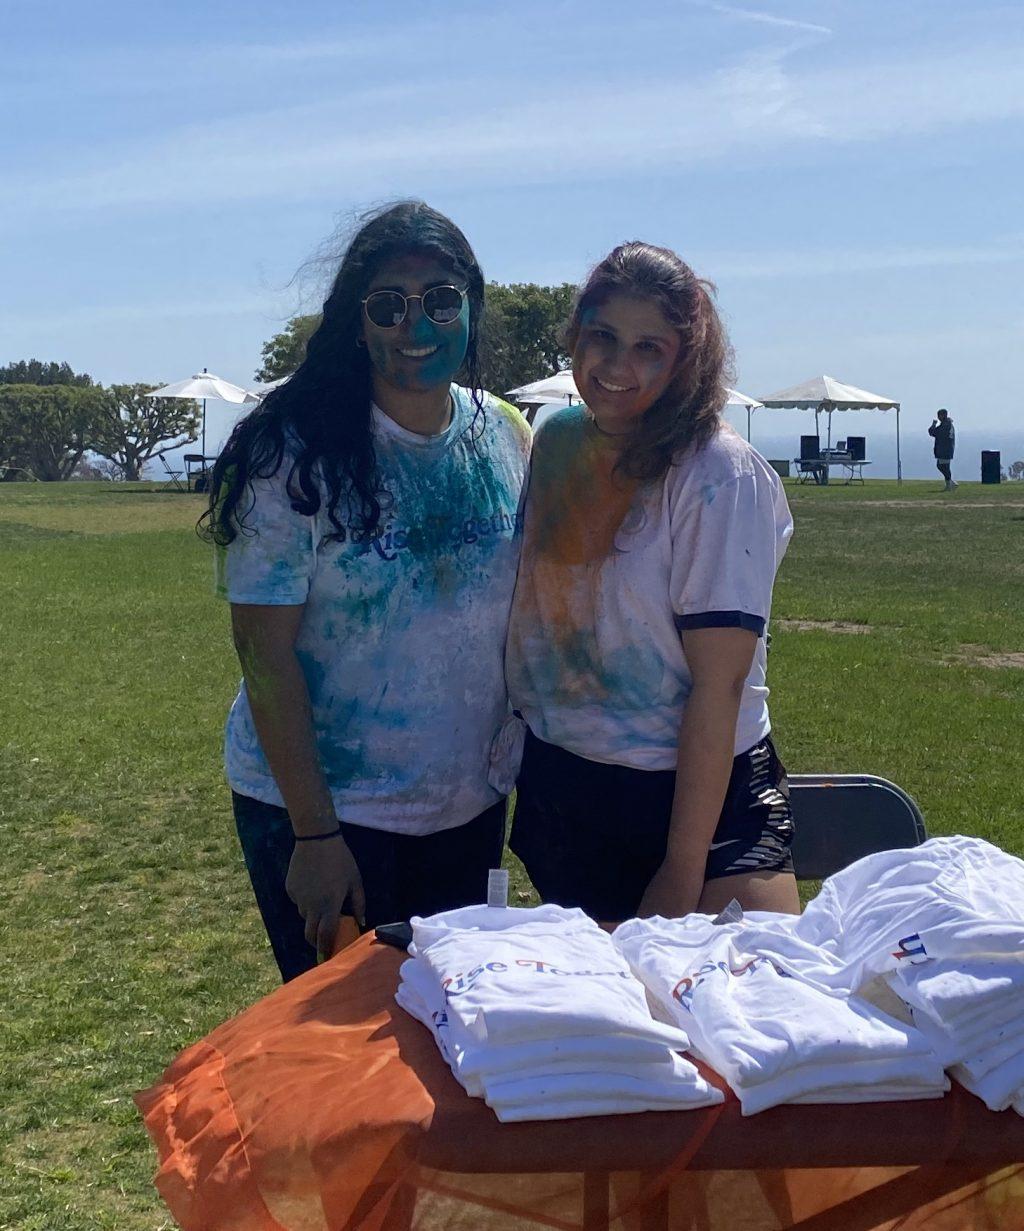 Bal and Chhabra greet students at the entrance and hand out shirts and colored powders. The two E-board members were excited to share their culture with the Pepperdine community. Photo by Christina Buravtsova